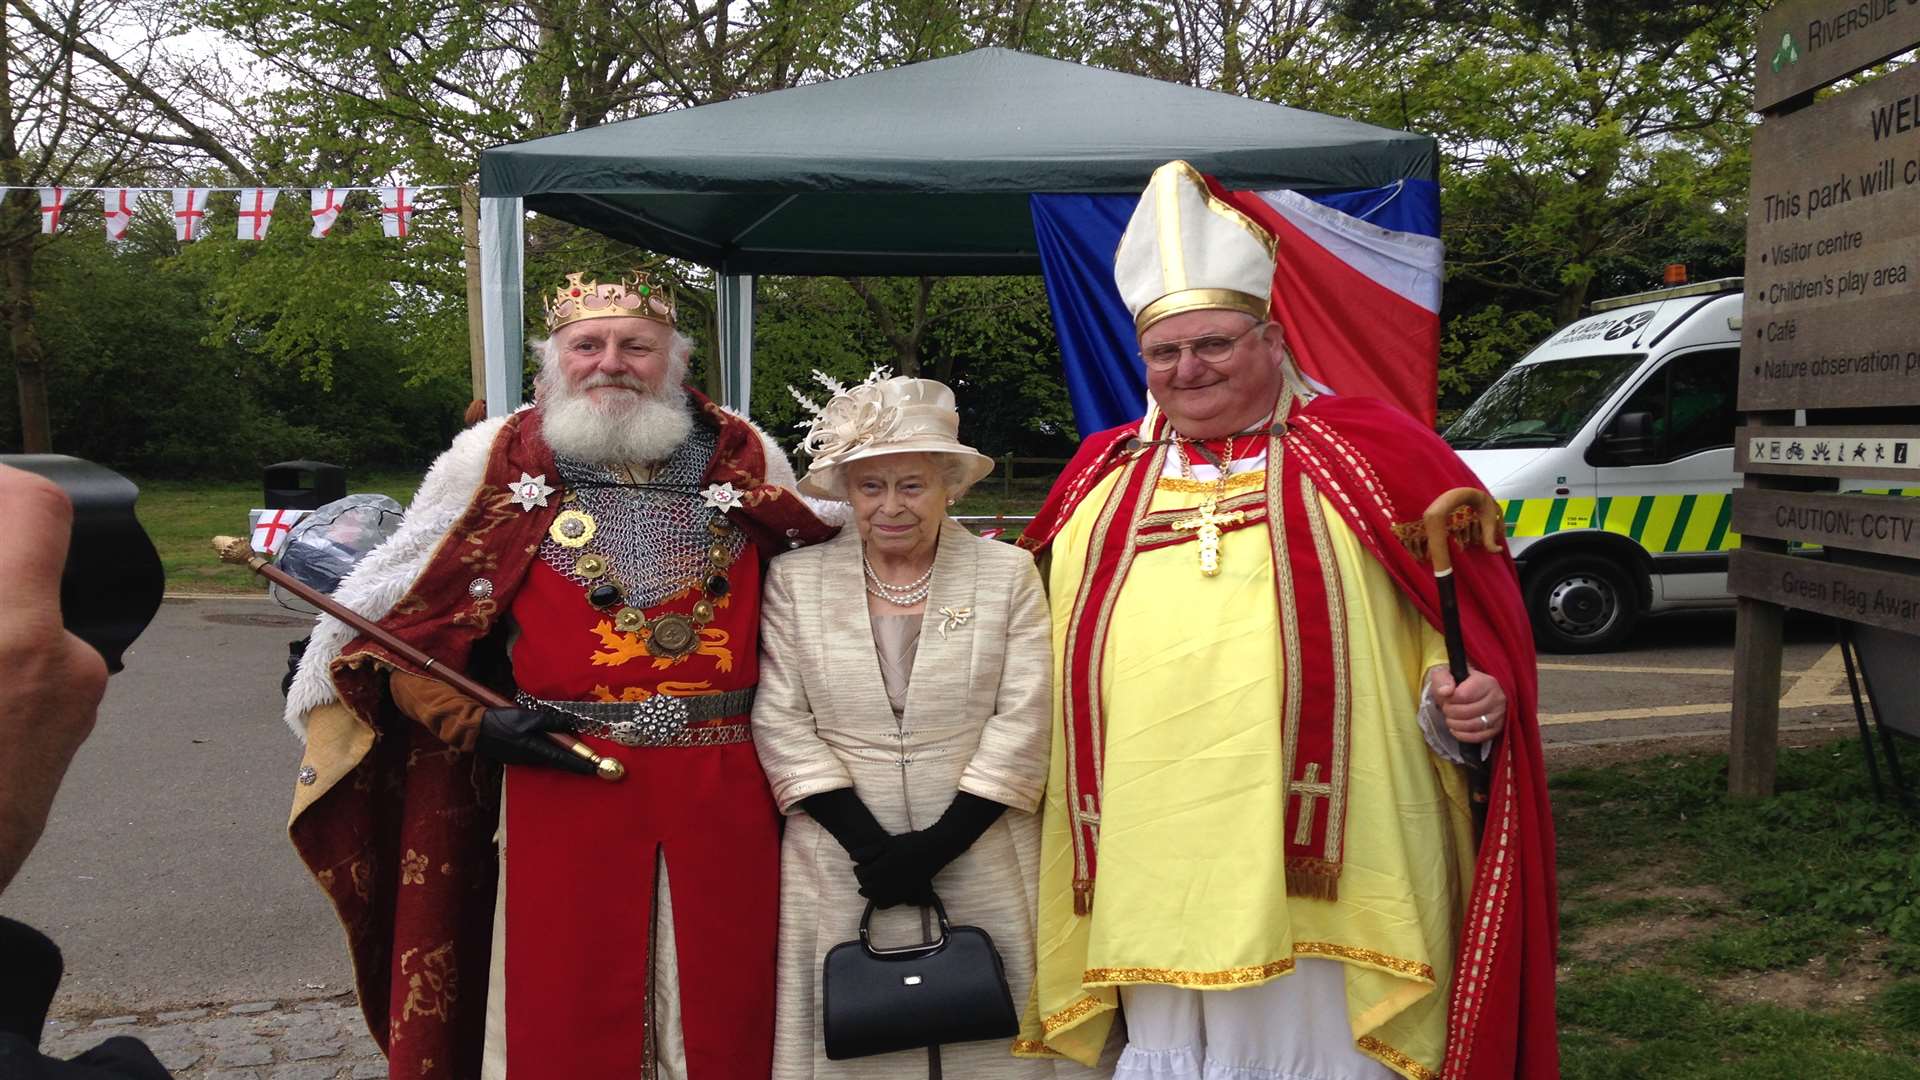 King George, The Queen and even an Archbishop were at the English Festival